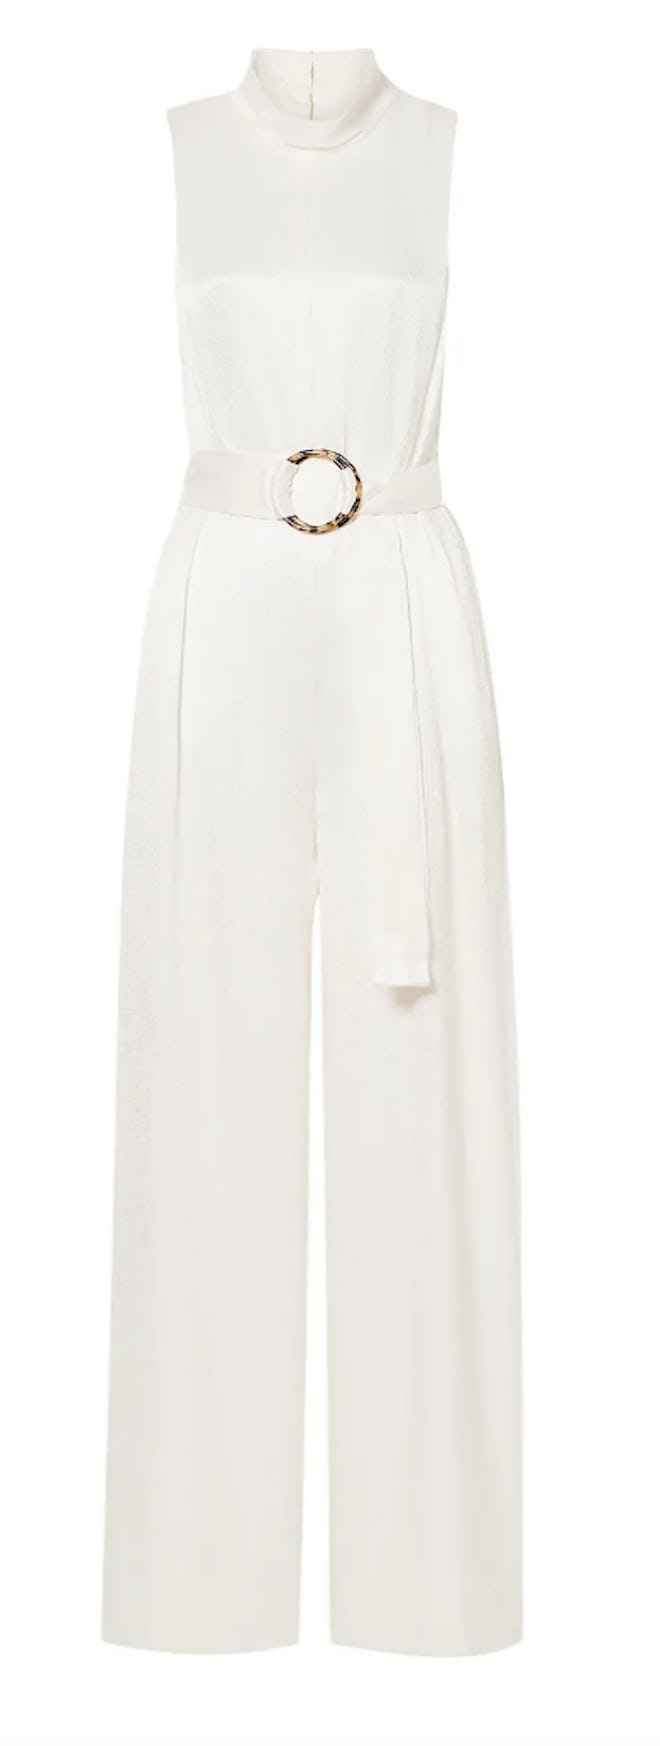 Sally Lapointe's white belted satin jumpsuit. 